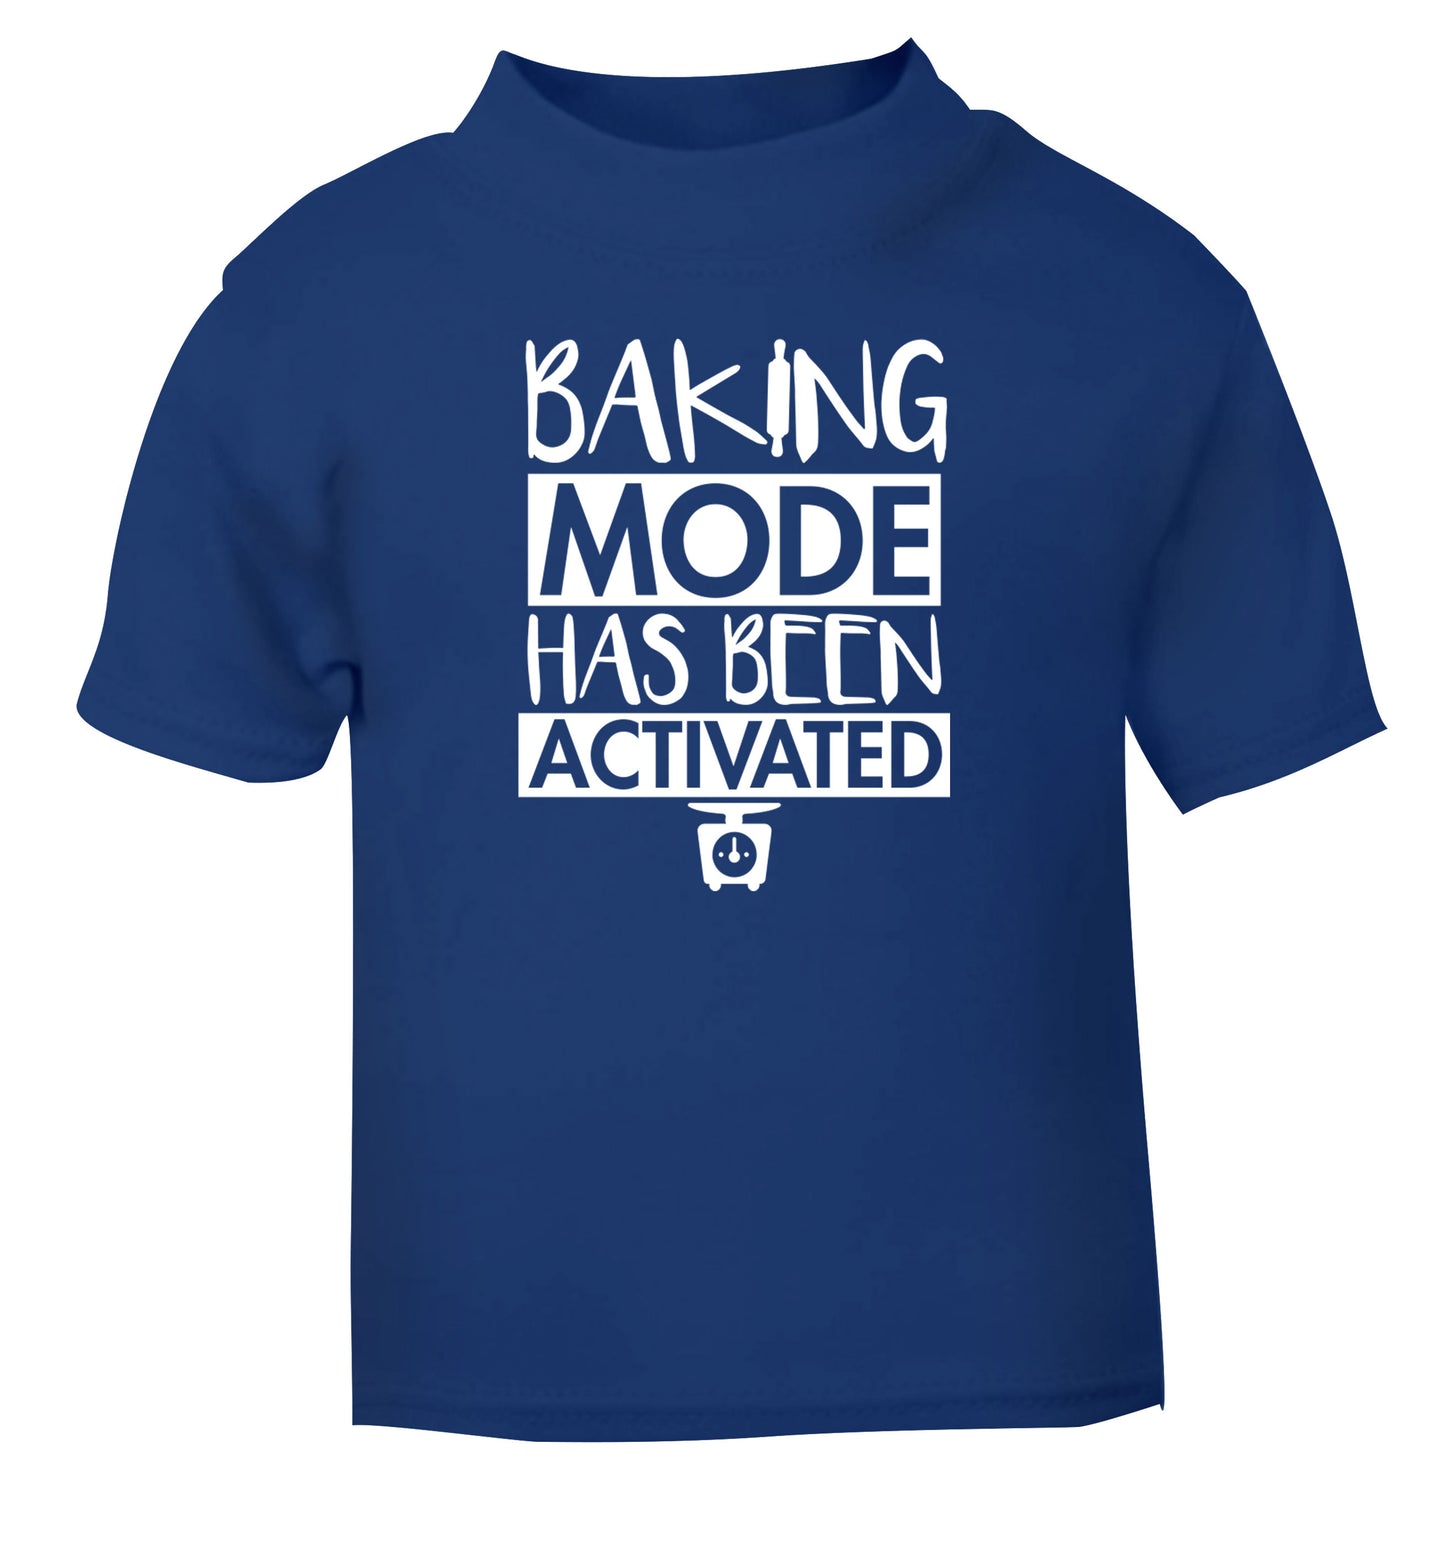 Baking mode has been activated blue Baby Toddler Tshirt 2 Years